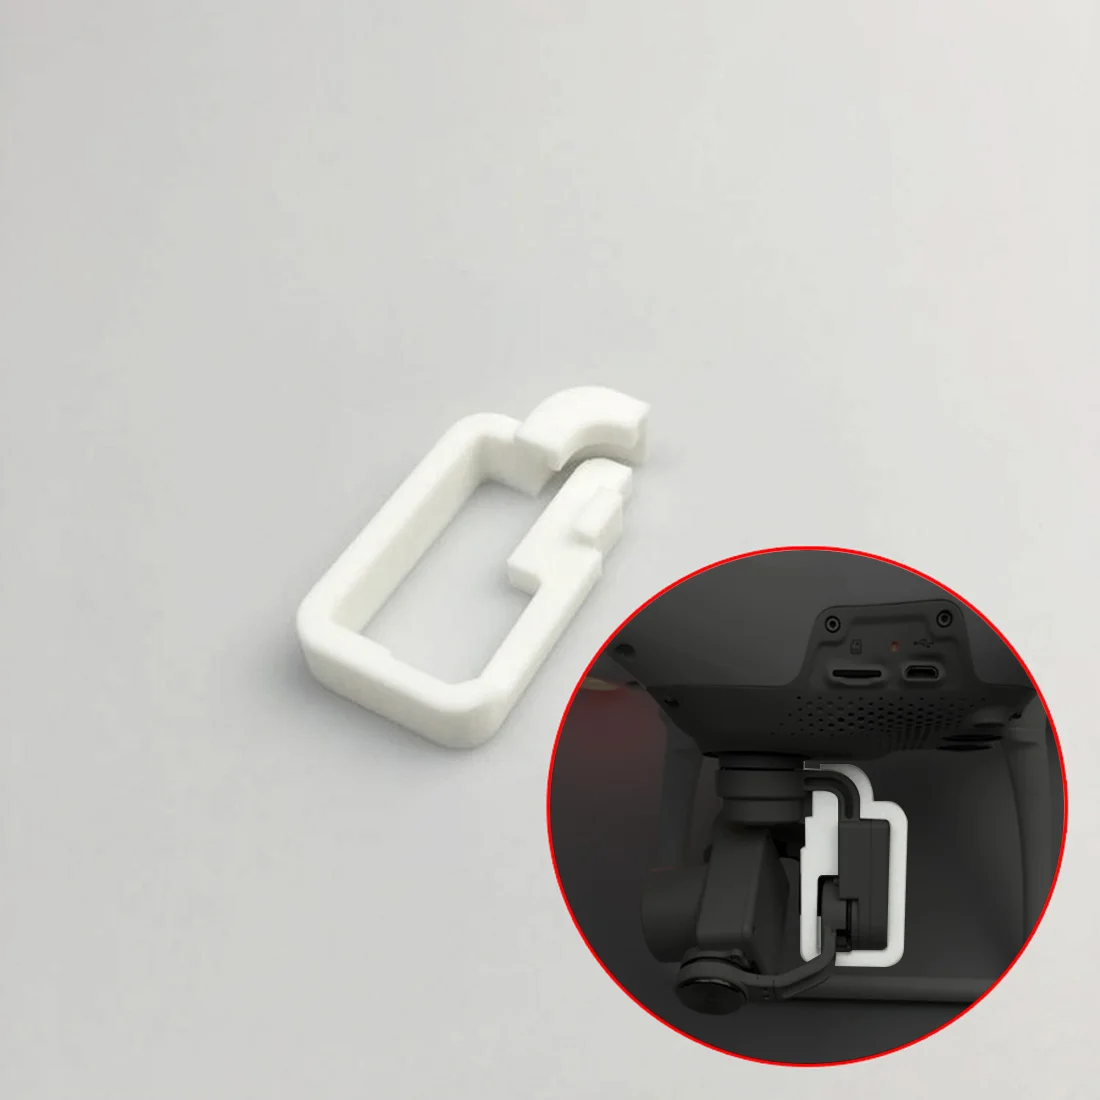 SHENSTAR 3D Printed Gimbal Protection Board Gimbal Camera Plate Protector For DJI Phantom 4 Quadcopter Drone RC Accessories